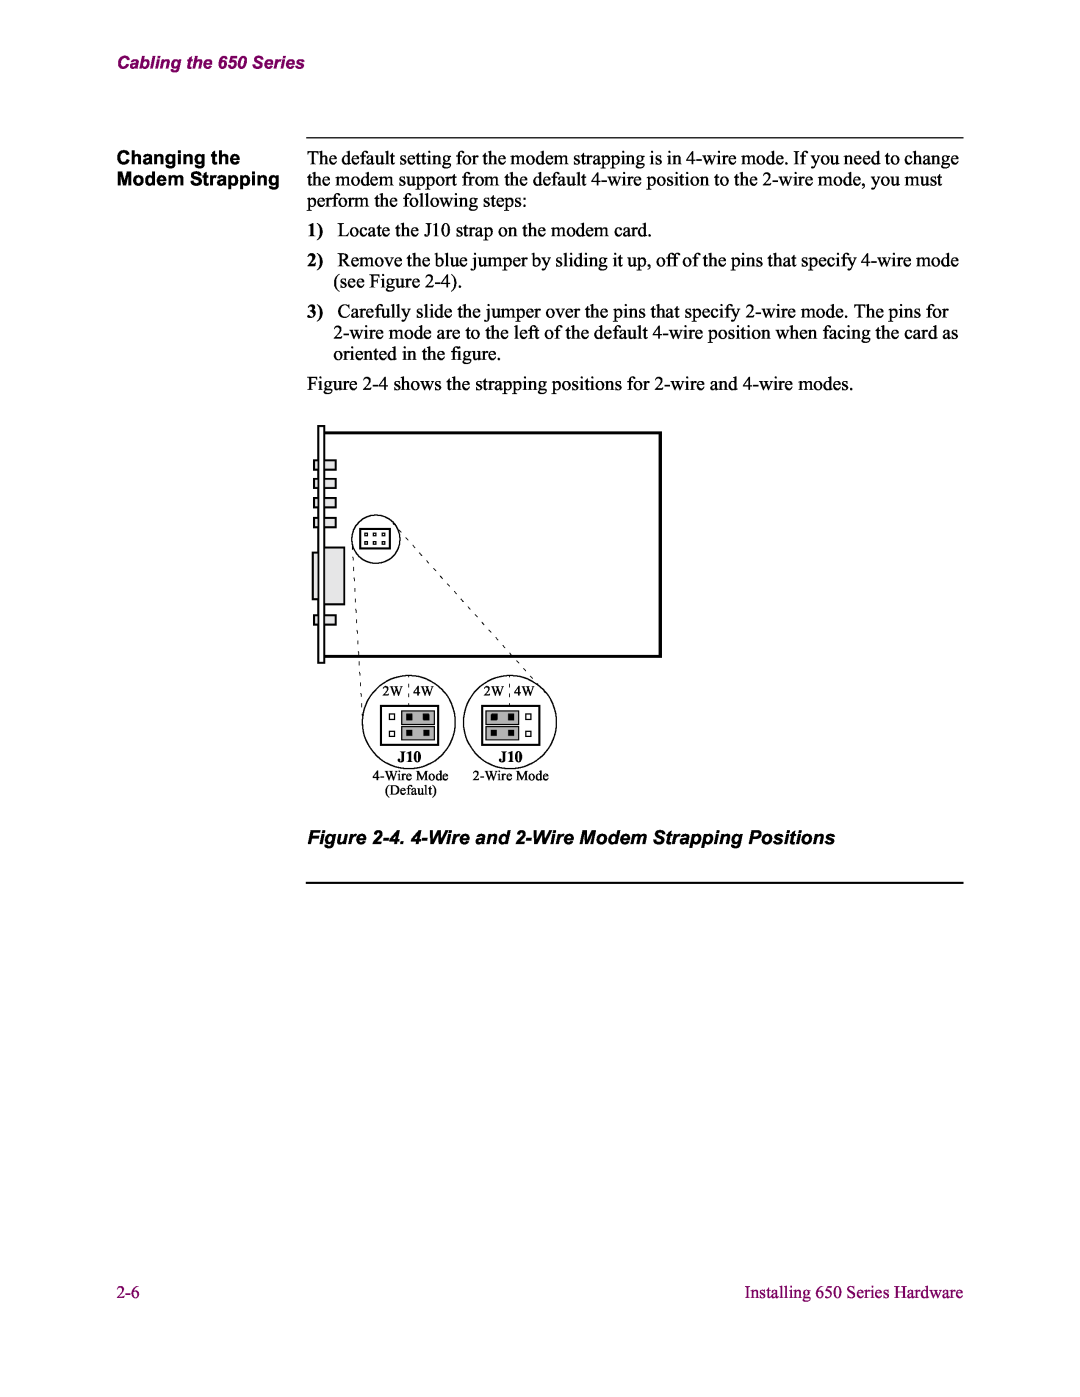 Vanguard Managed Solutions 650 installation manual Changing the, 4. 4-Wire and 2-Wire Modem Strapping Positions 